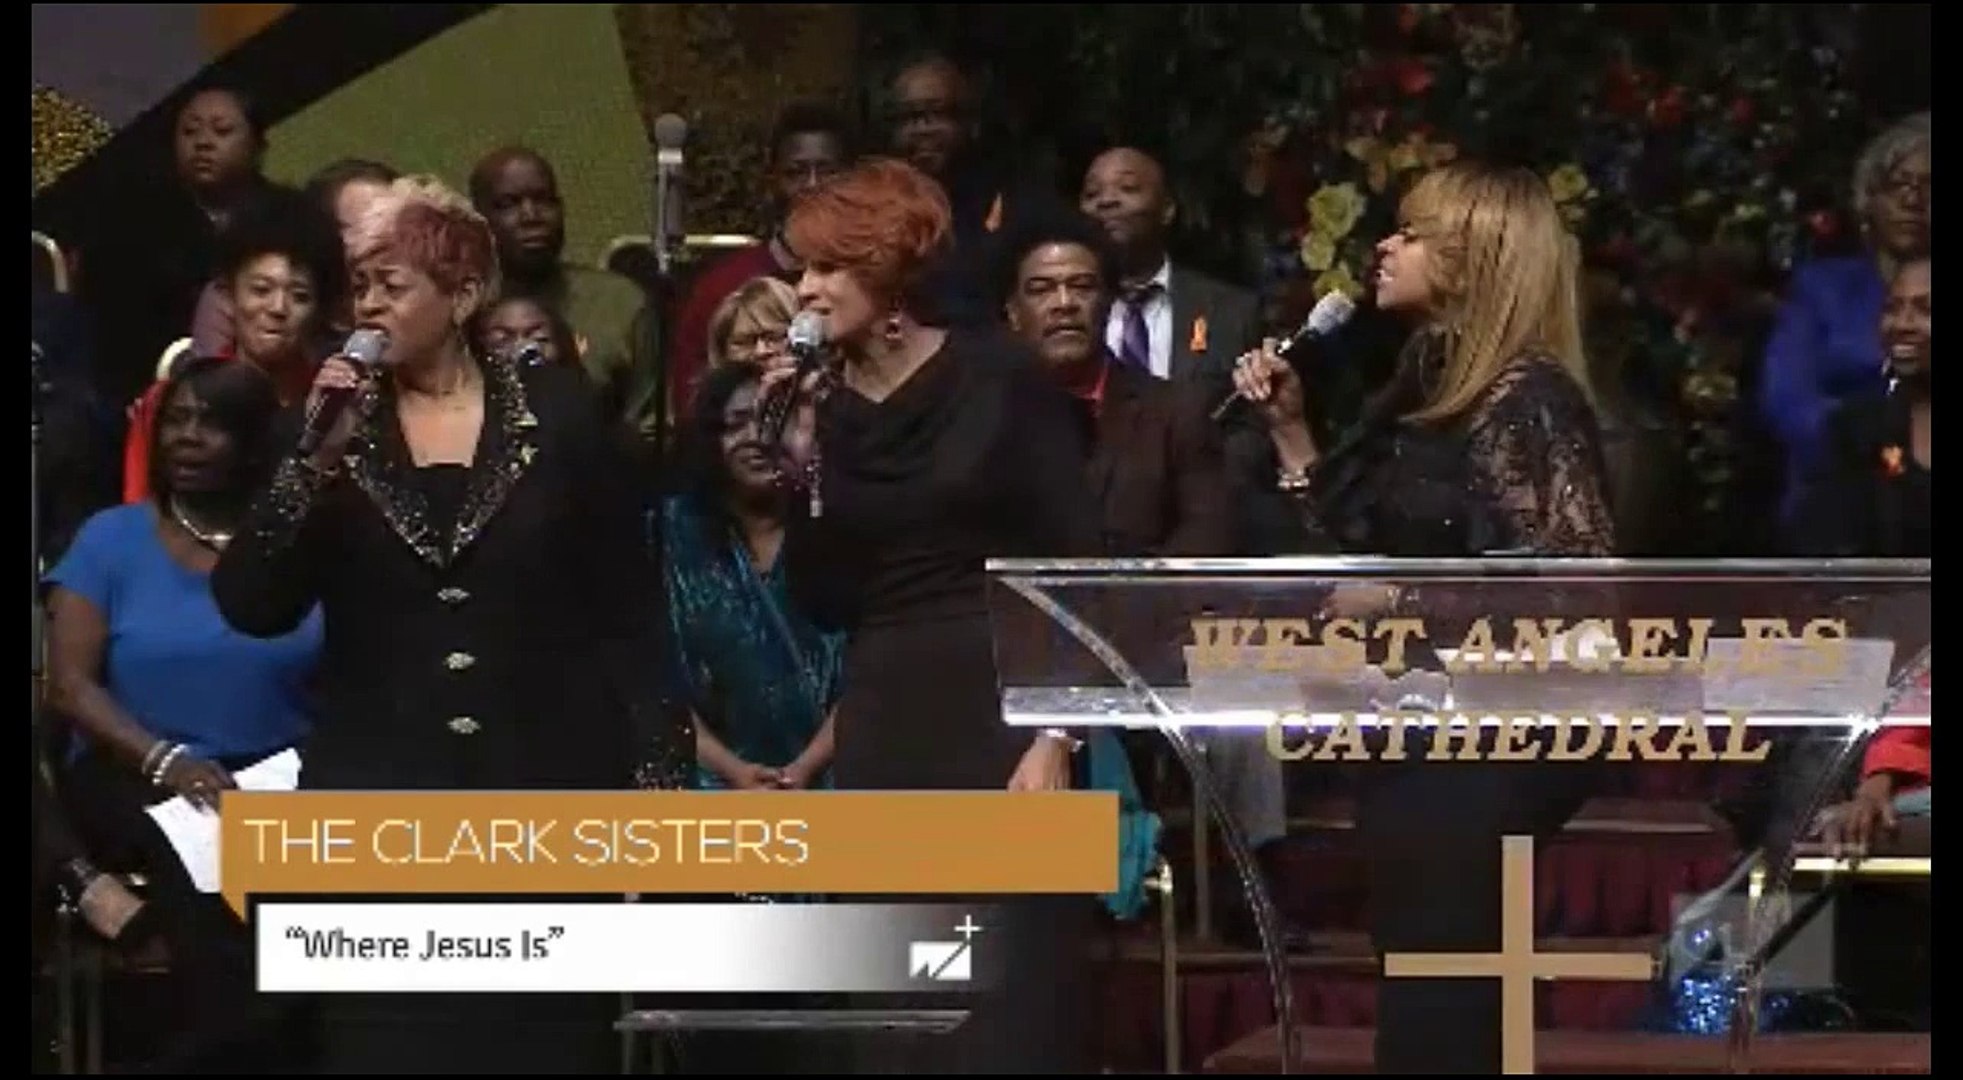 The Clark Sisters - Where Jesus Is + Is My Living In Vain - Andrae Crouch Celebration of Life Concert Funeral - 01-21-2015 - Vídeo